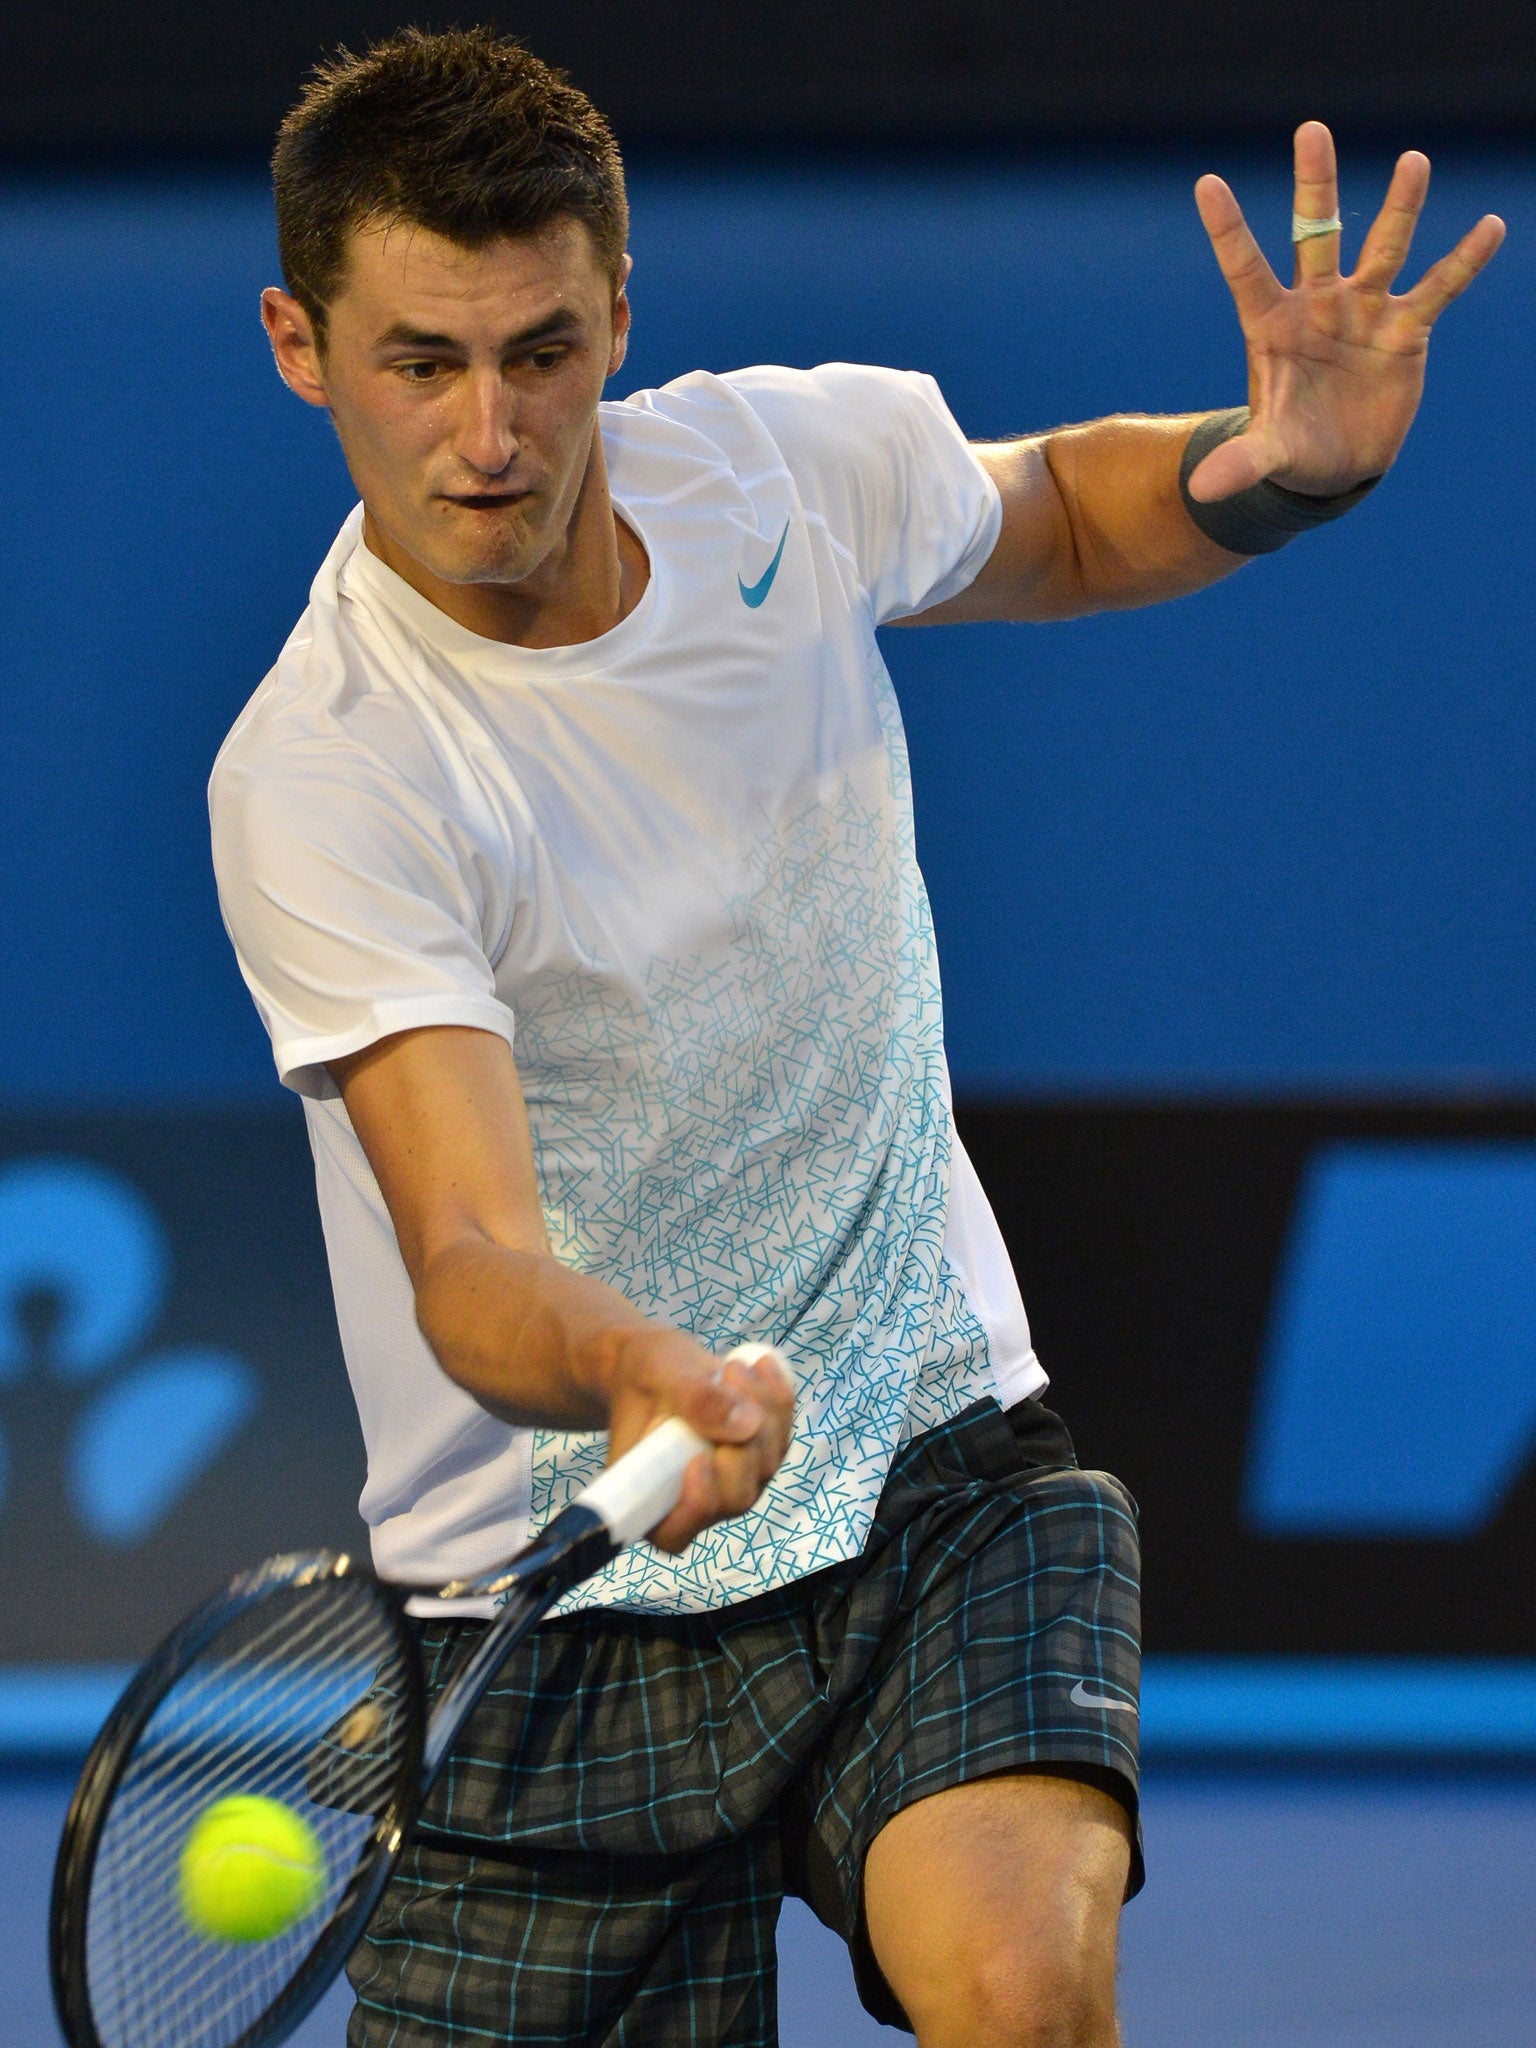 Moment of strewth: Bernard Tomic, the only remaining home player in the Australian Open singles, was beaten in straight sets by Roger Federer